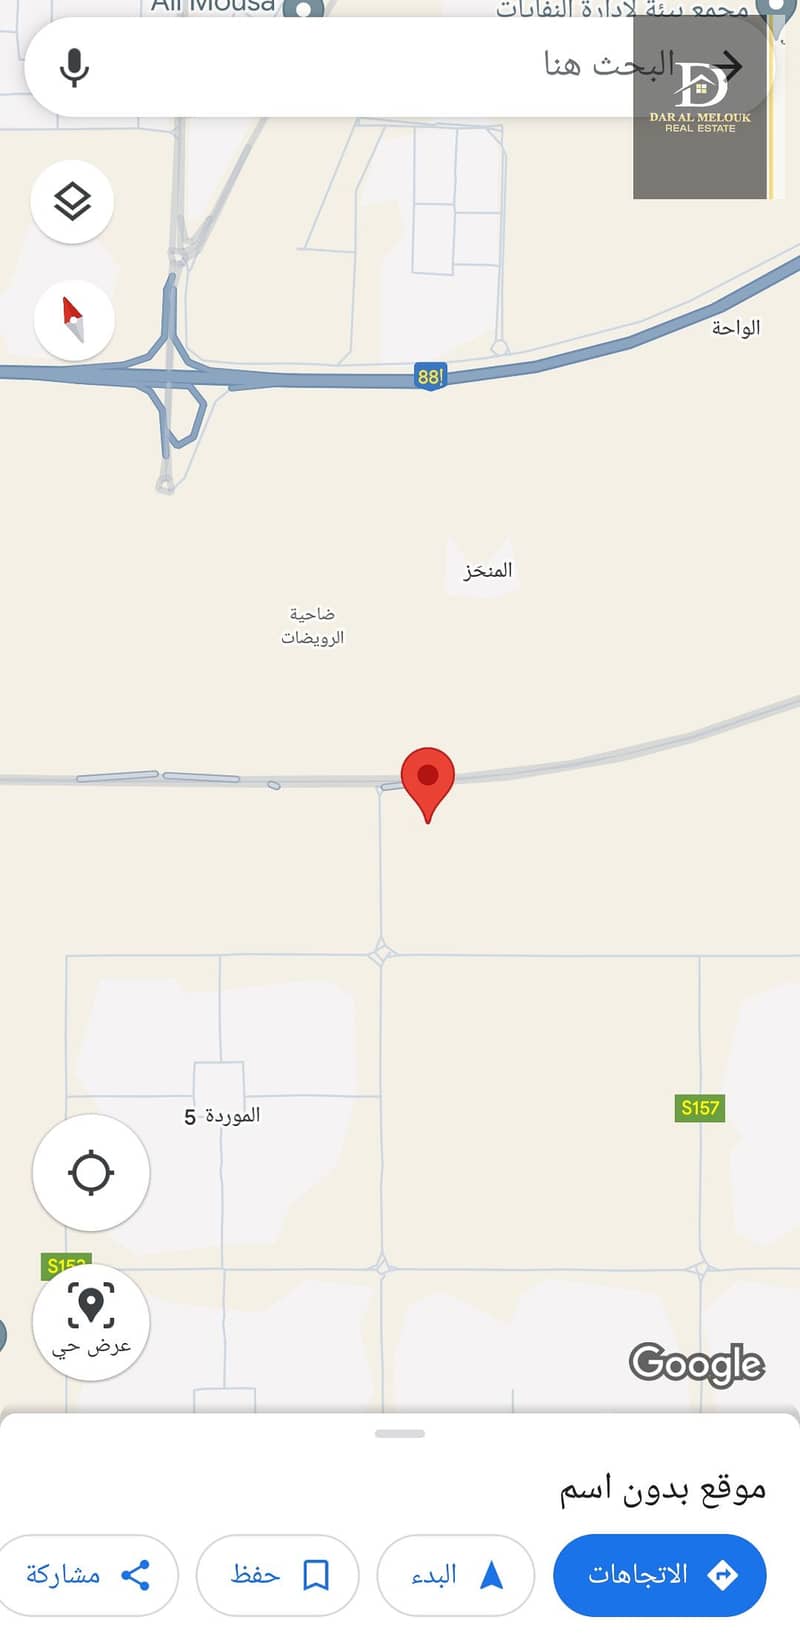 For sale in Sharjah, Al-Sahmah area, residential land, area of ​​3000 feet, permit for a ground and two-storey villa, excellent location, close to the mosque, freehold, all Arab nationalities, installments completed. Al-Sahmah area is distinguished by bei